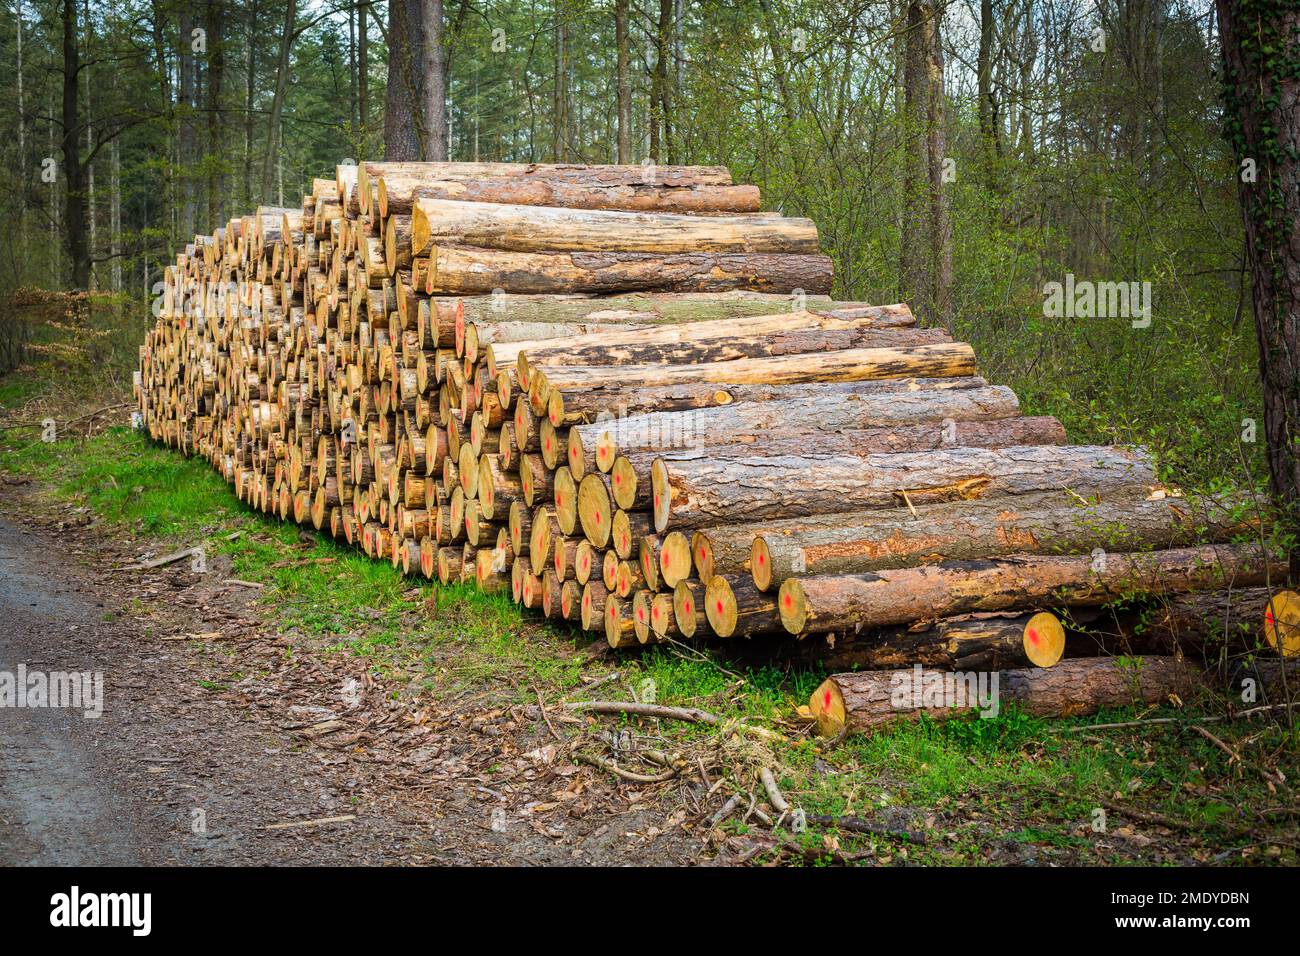 Forest pine and spruce trees. Log trunks pile, the logging timber wood industry Stock Photo